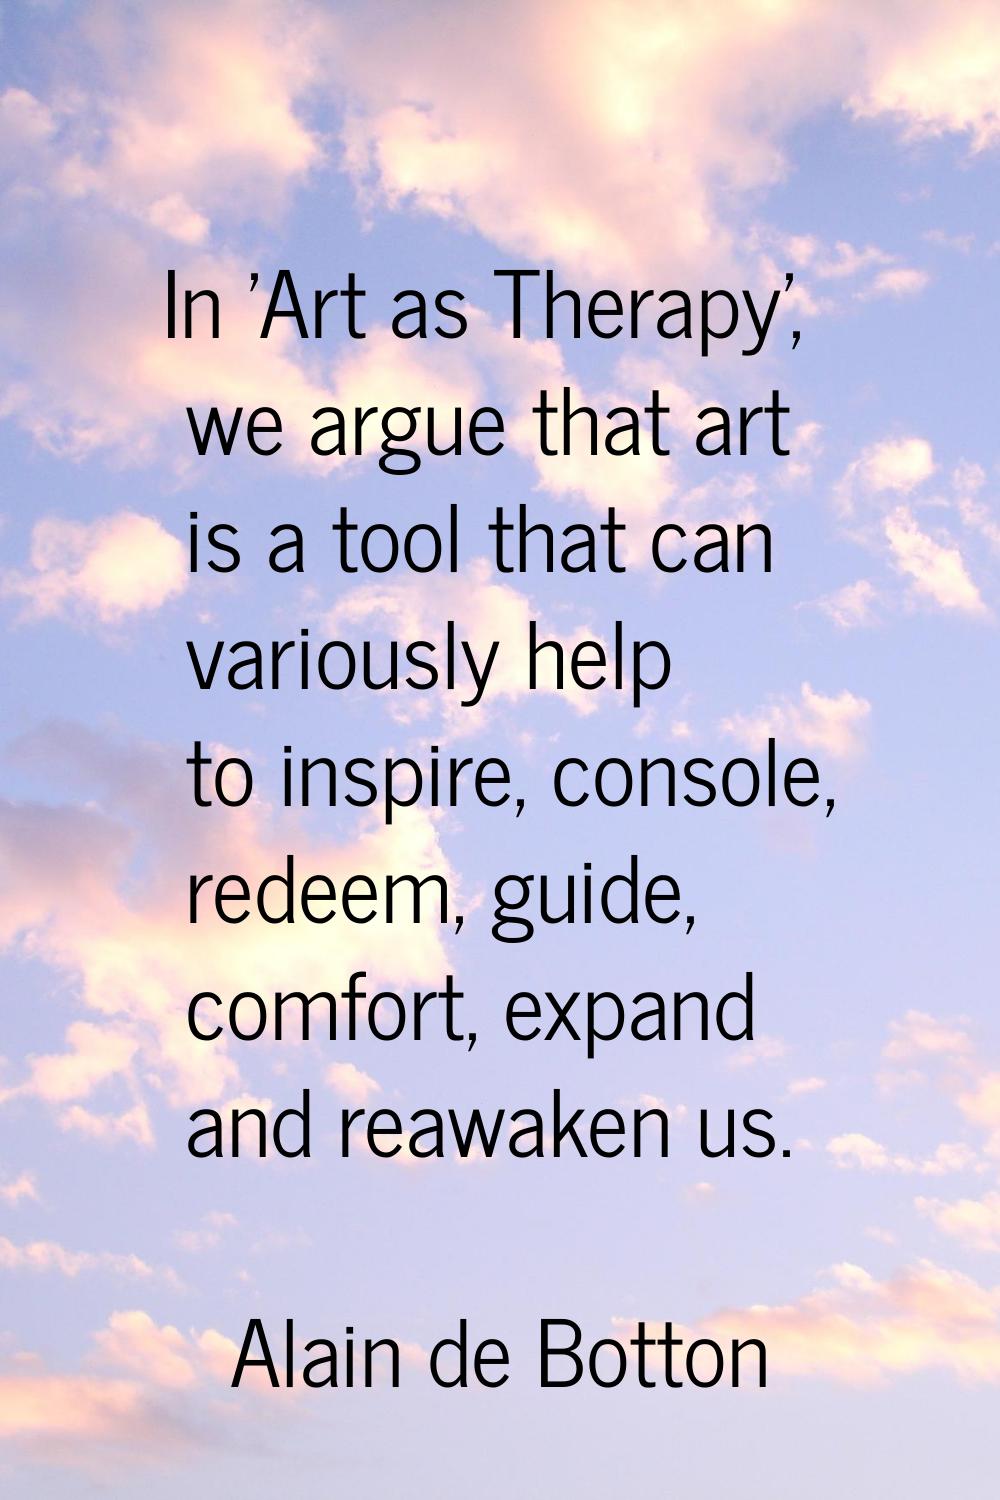 In 'Art as Therapy', we argue that art is a tool that can variously help to inspire, console, redee